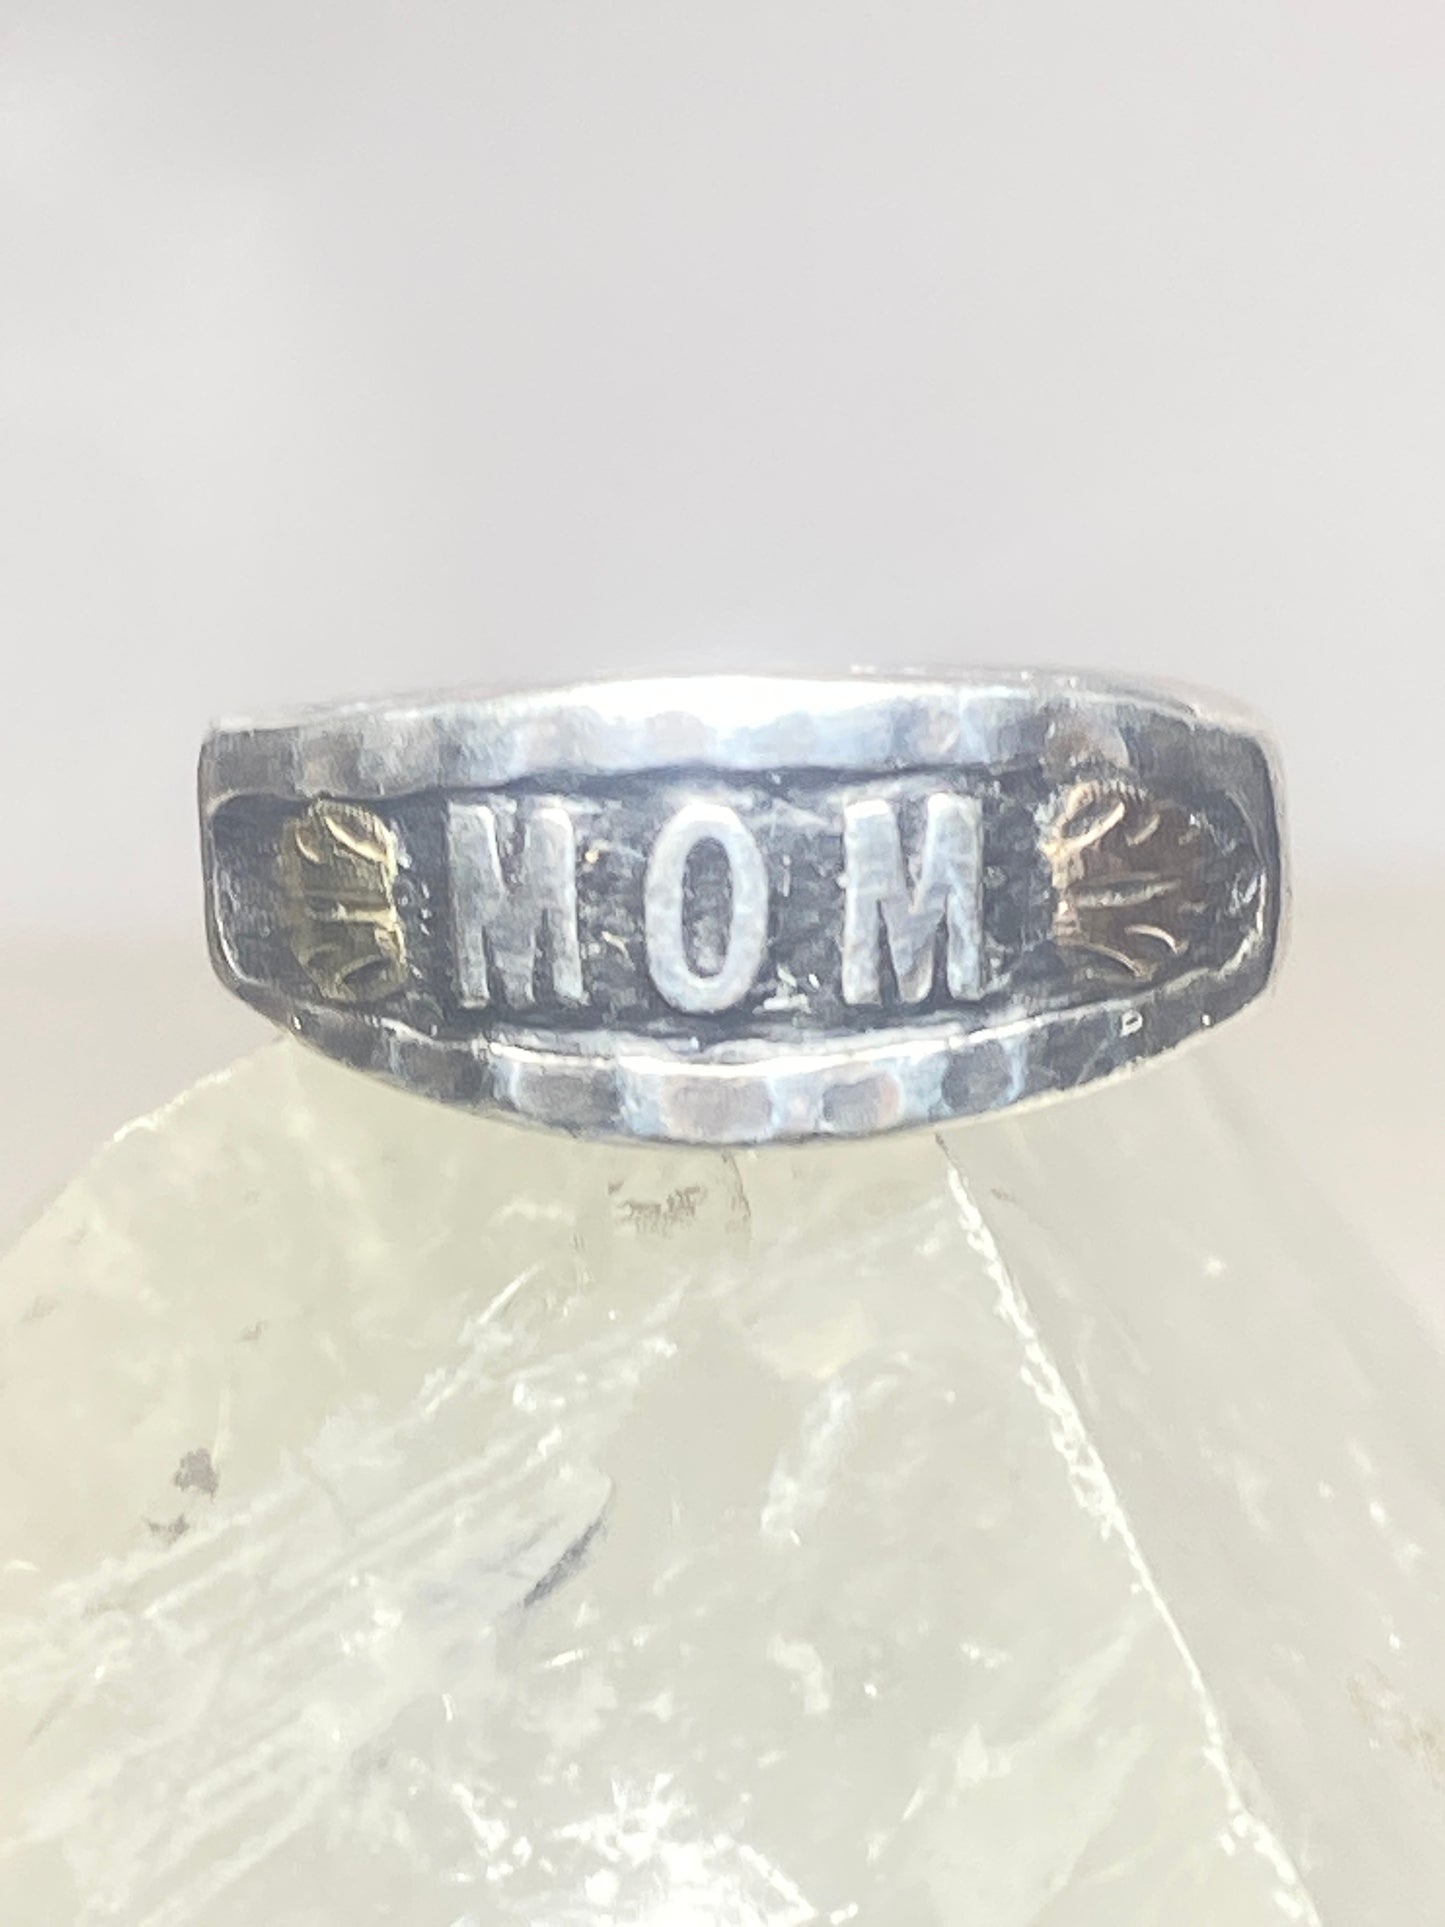 Mom ring size 6.25 Black Hills Gold leaves  Mothers Day band sterling silver women